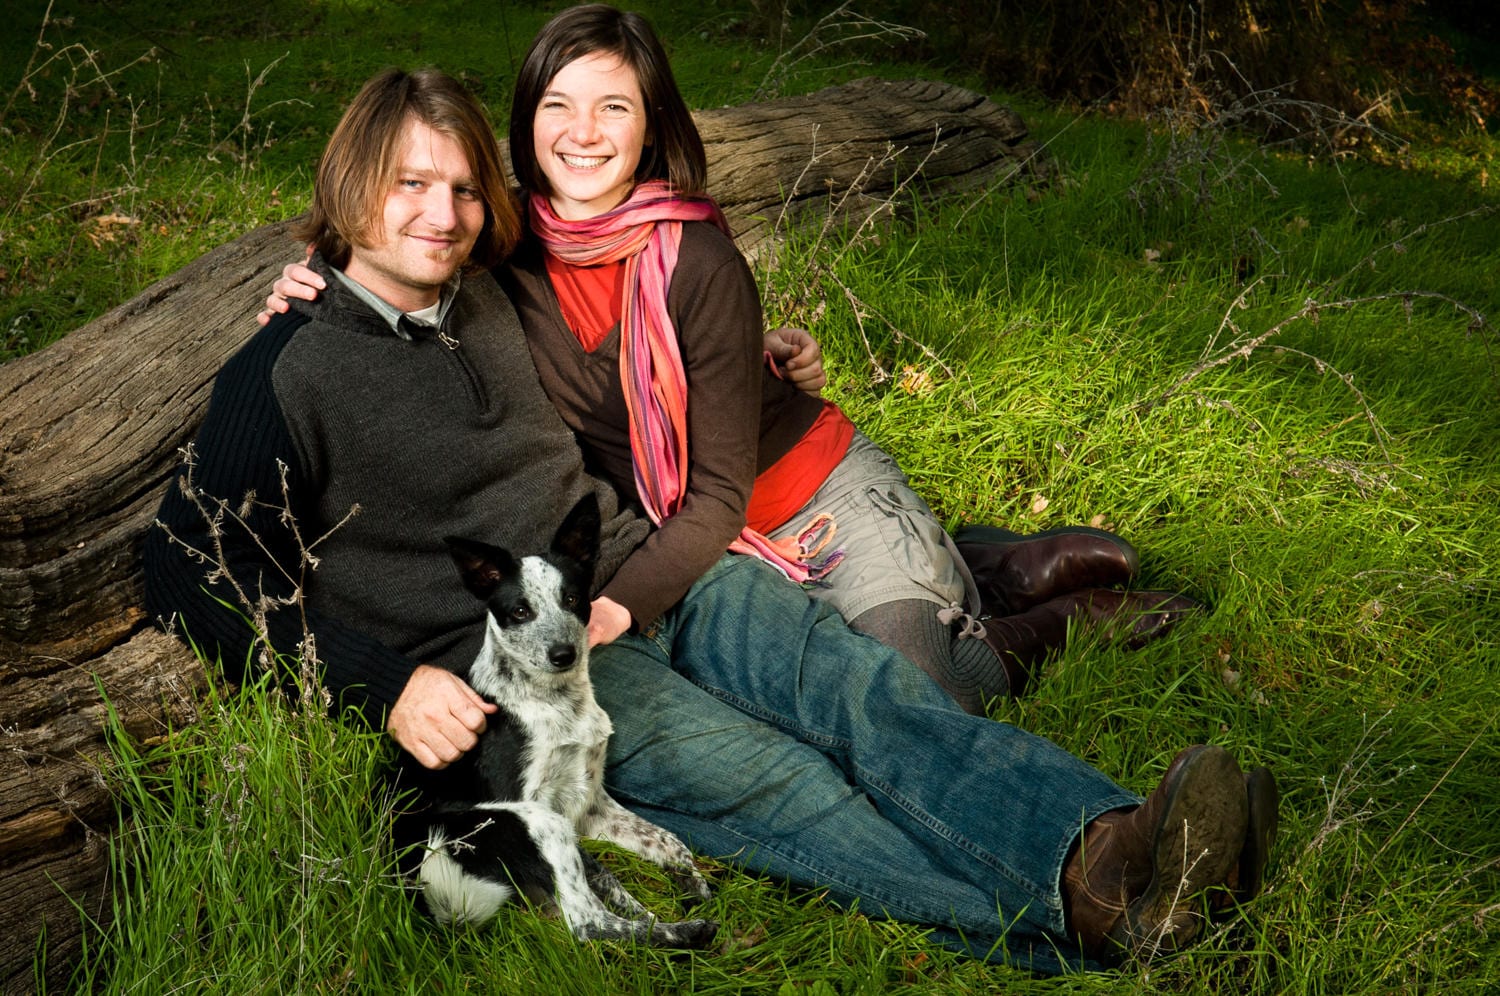 Montana Portrait Photography couple with pet on grass